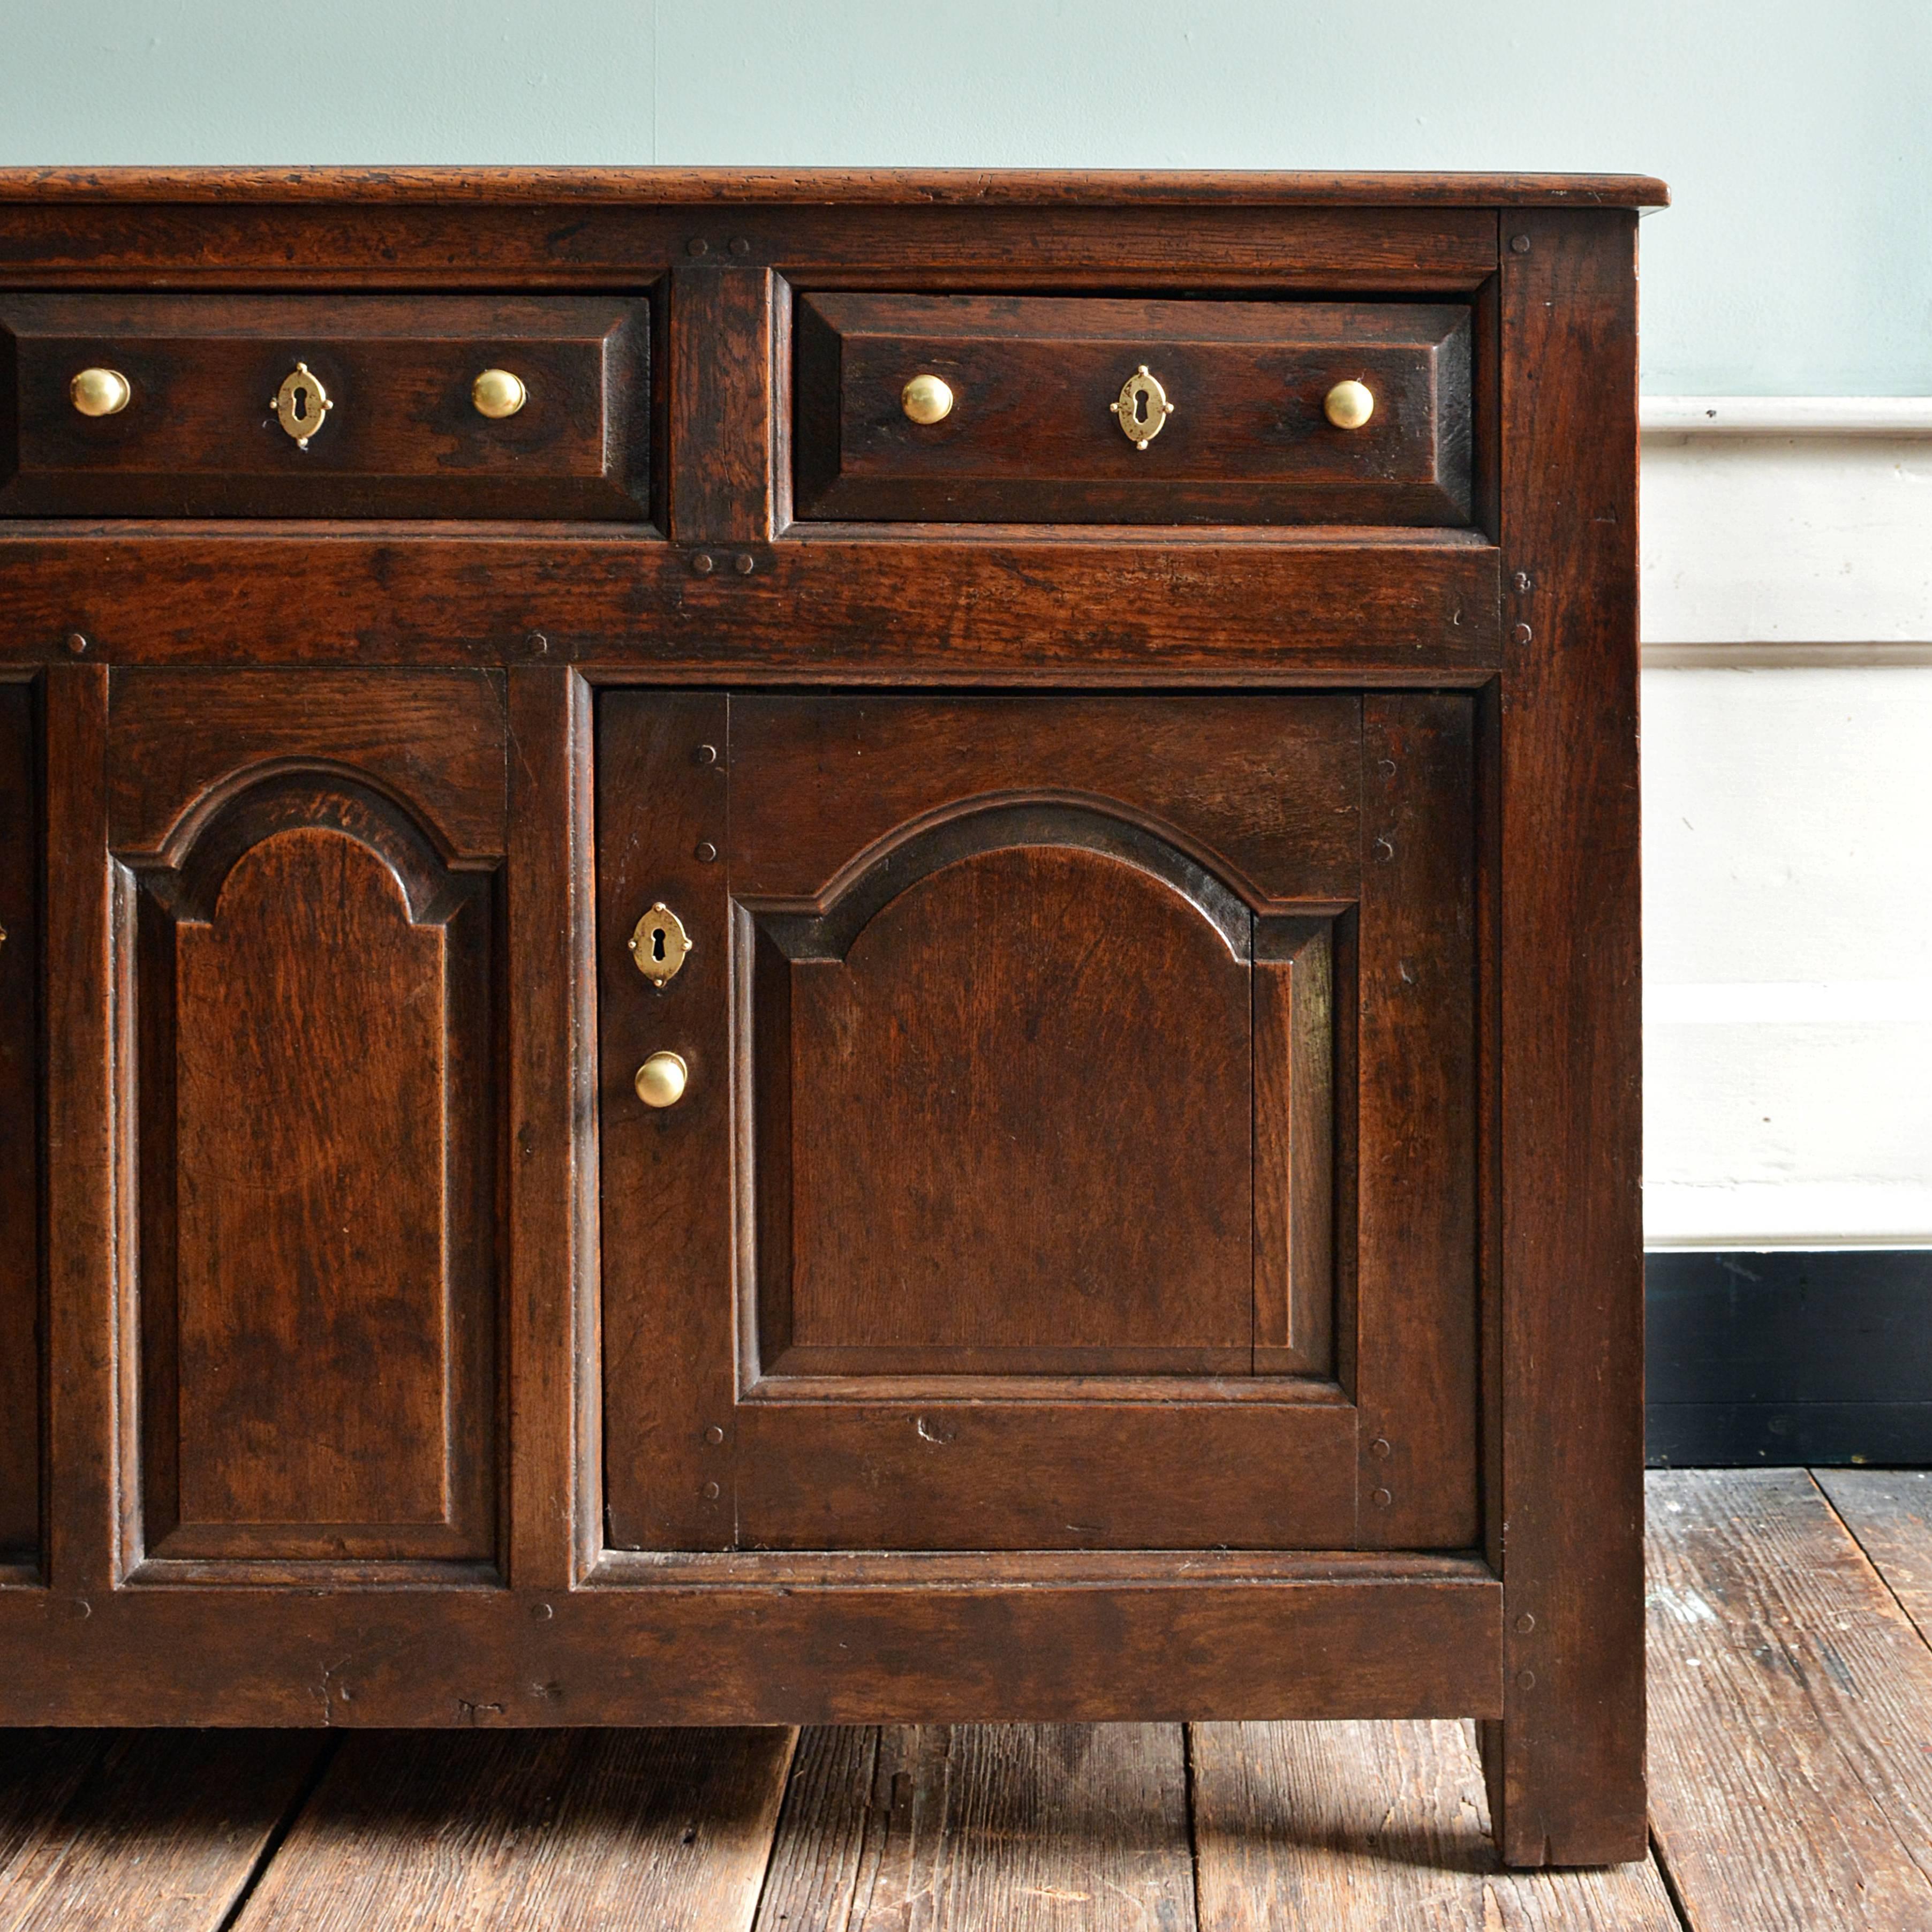 A George II oak dresser base, circa 1730, Caernarfonshire, North Wales, the three fielded drawers over central arch arched fielded panel flanked by a pair of arch fielded cupboards, on stile supports. Excellent color and patination